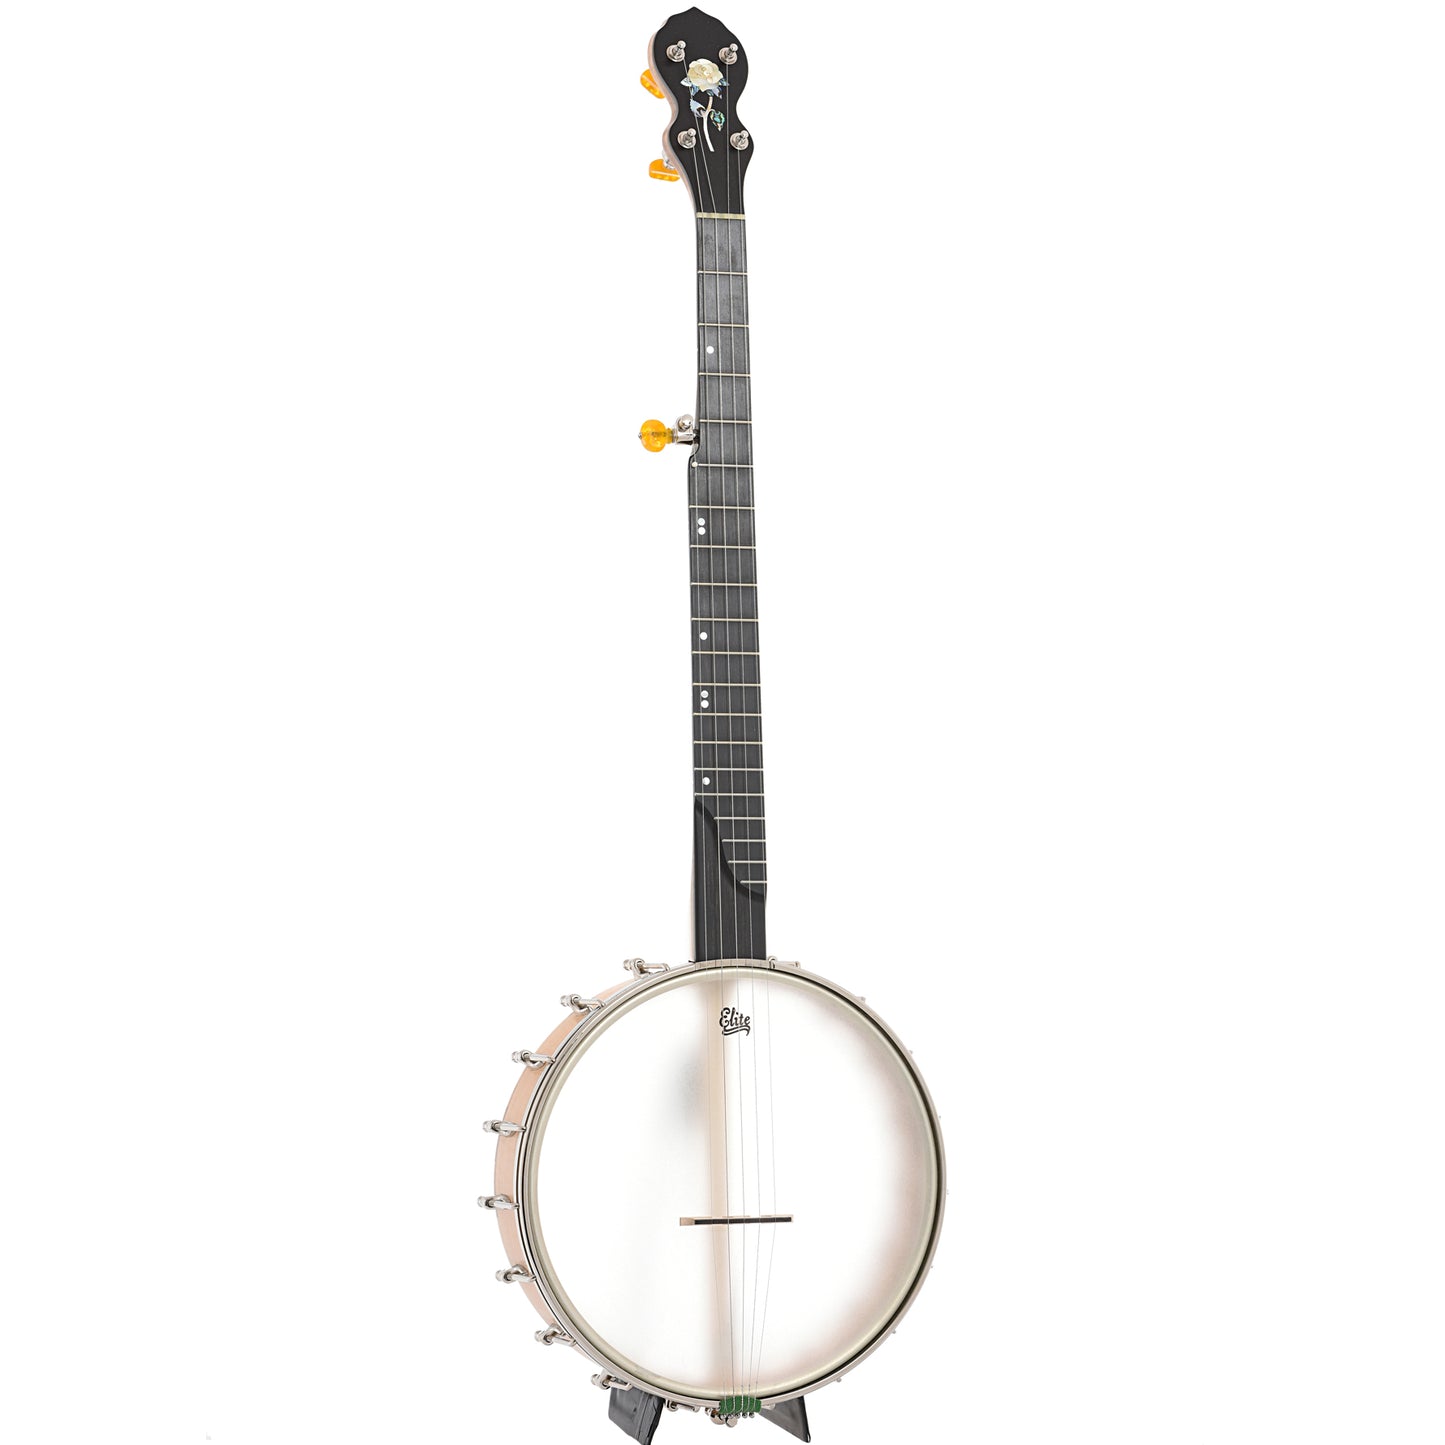 Full front and side of Chuck Lee Glen Rose #858 Openback Banjo, Electric (Whyte Laydie) Tone Ring, 11" Rim